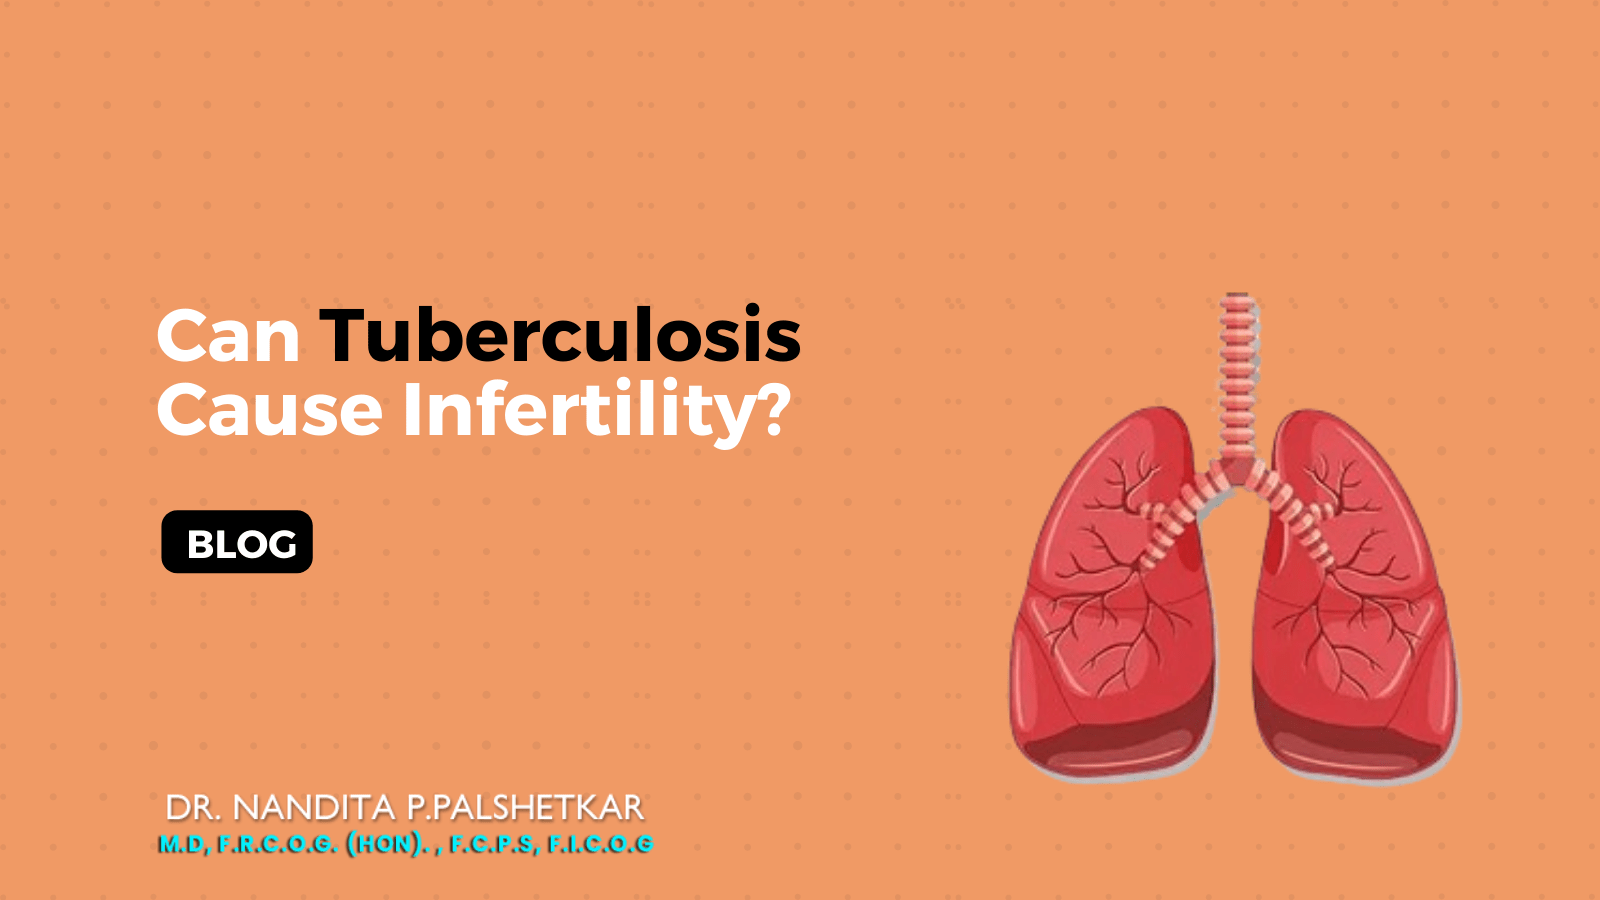 Can Tuberculosis Cause Infertility?